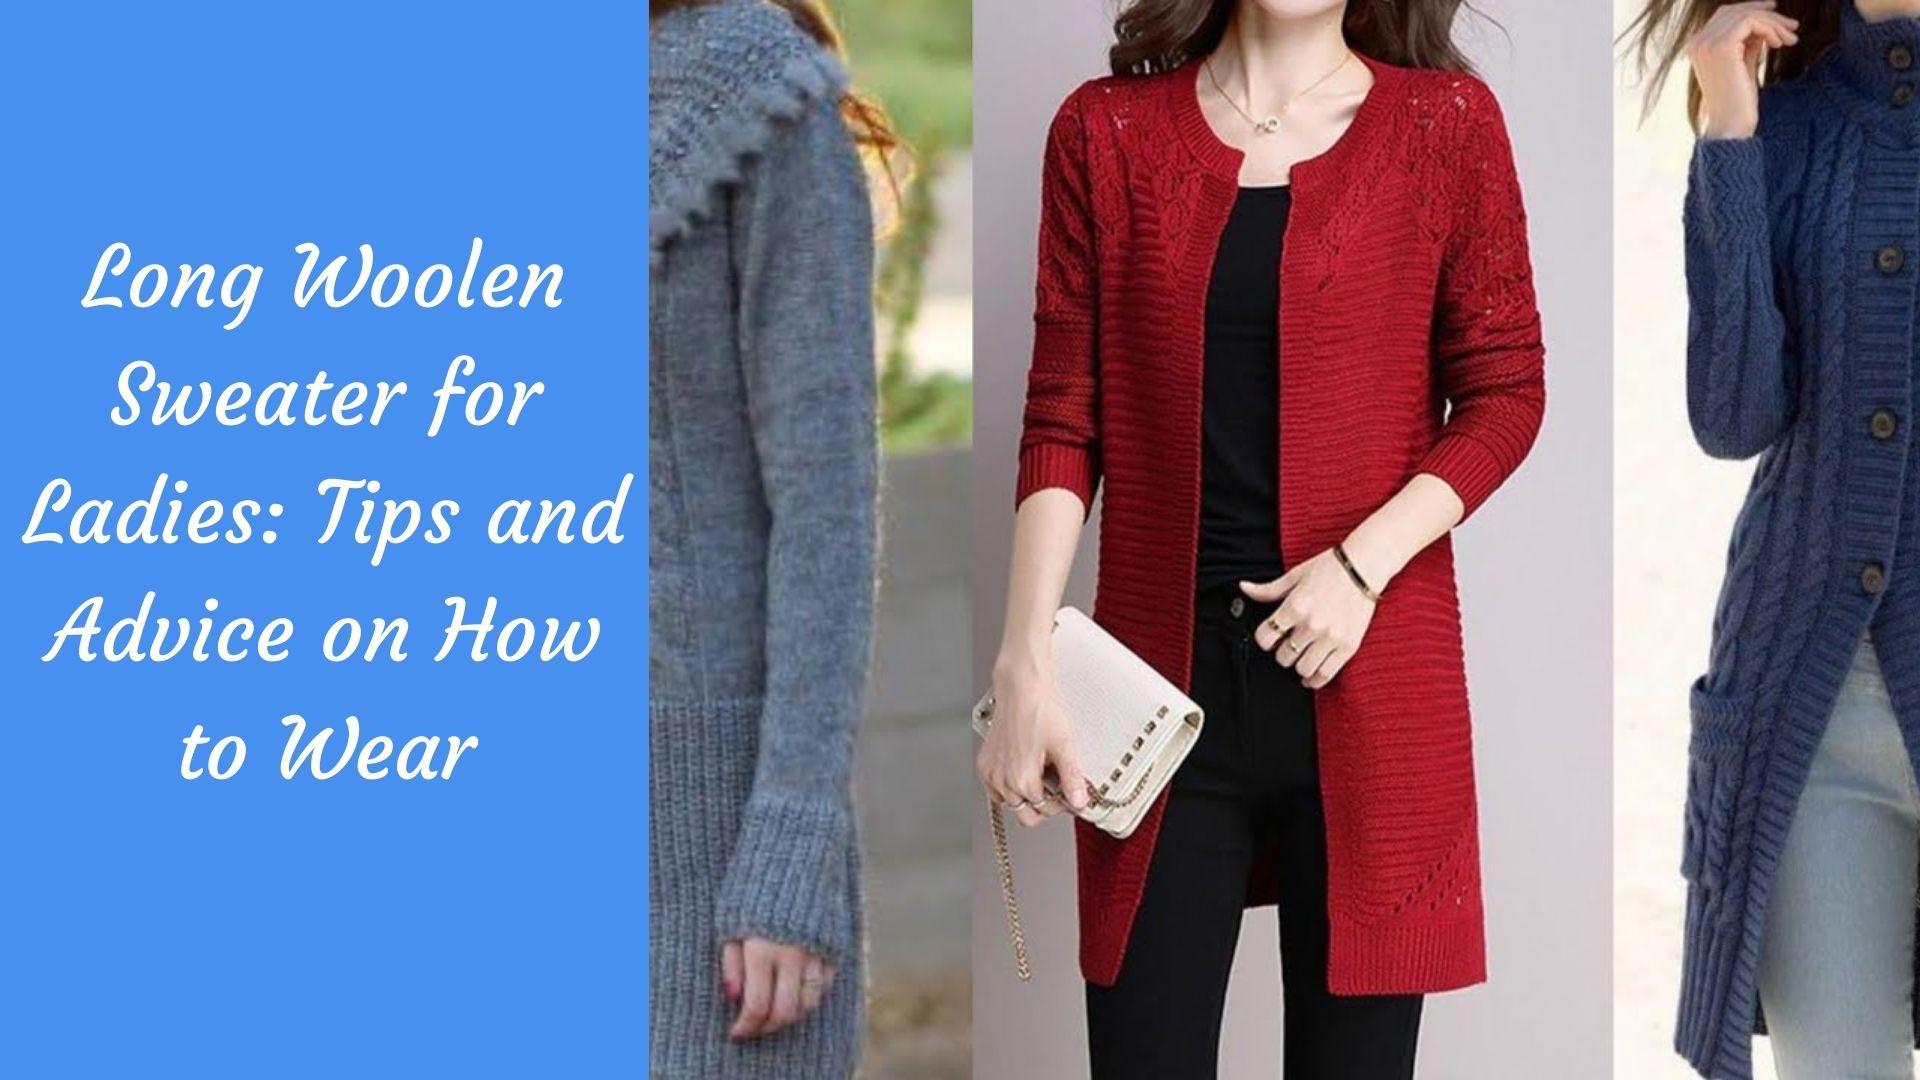 Long Woolen Sweater for Ladies: Tips and Advice on How to Wear